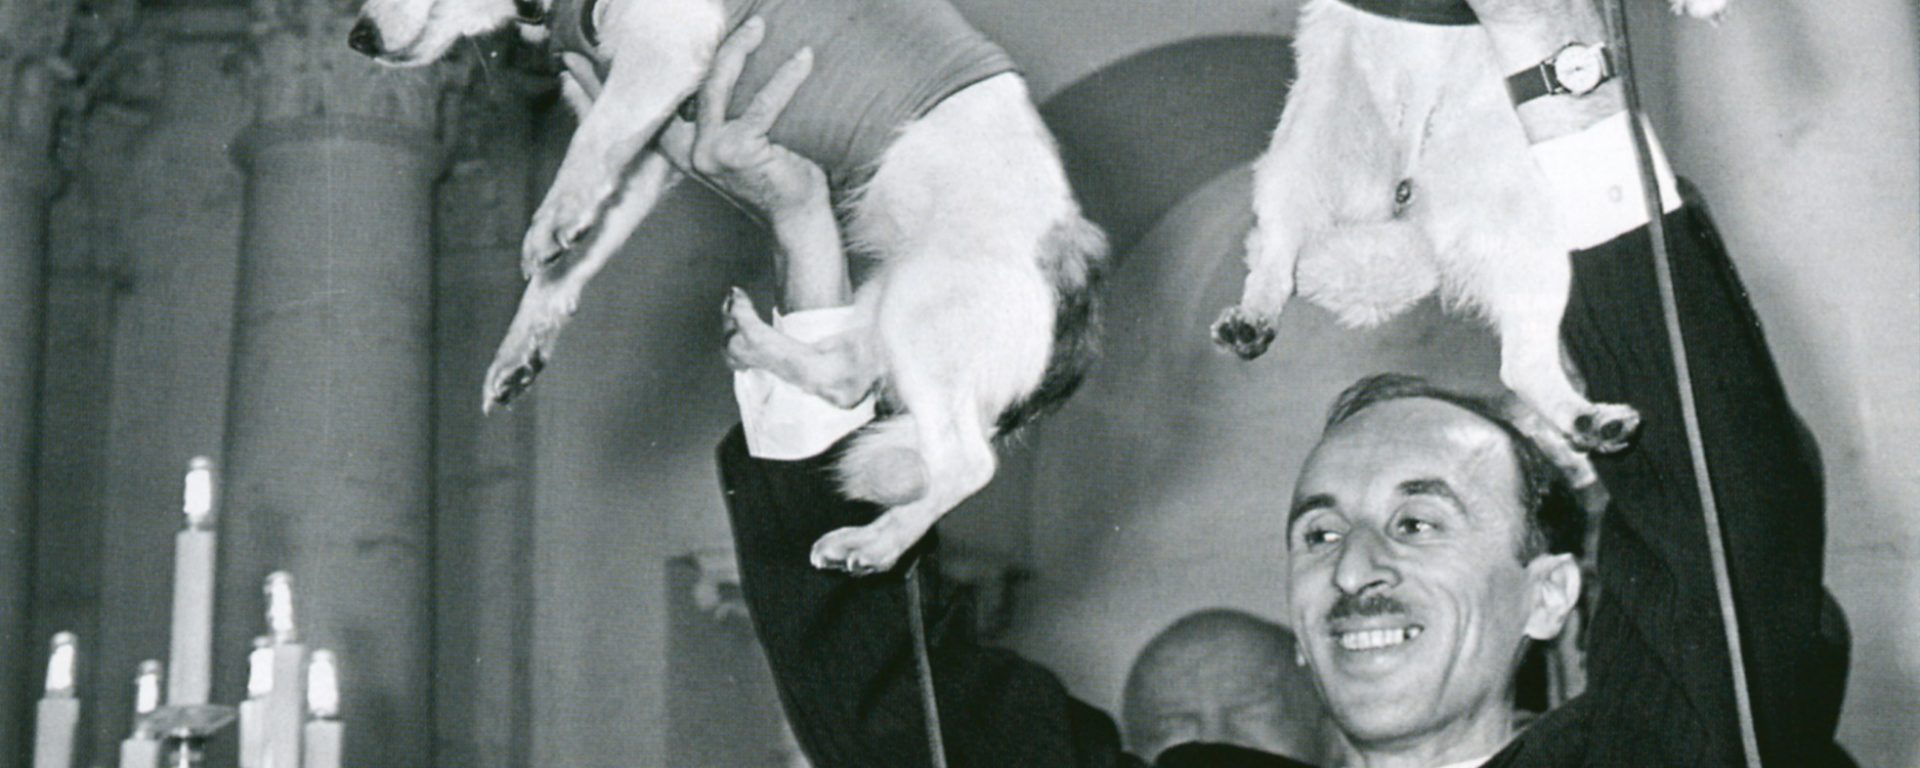 Former director of the Institute of Biomedical Problems, Oleg Georgievich Gazenko, holds up Soviet space dogs Belka and Strelka.